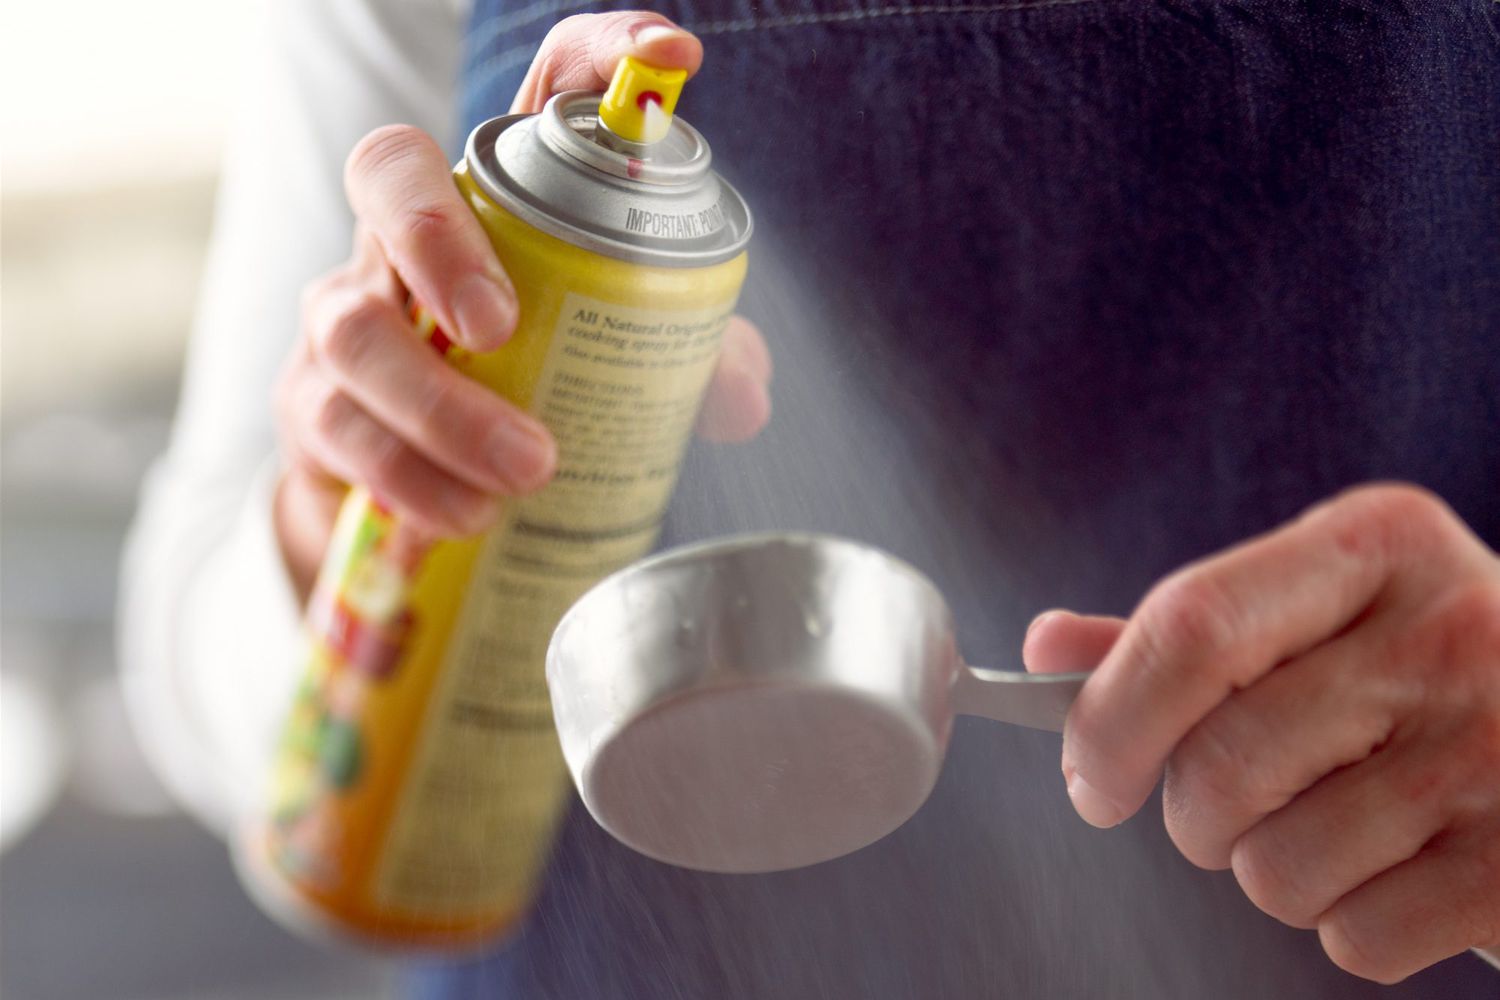 How to Use Cooking Sprays Safely?